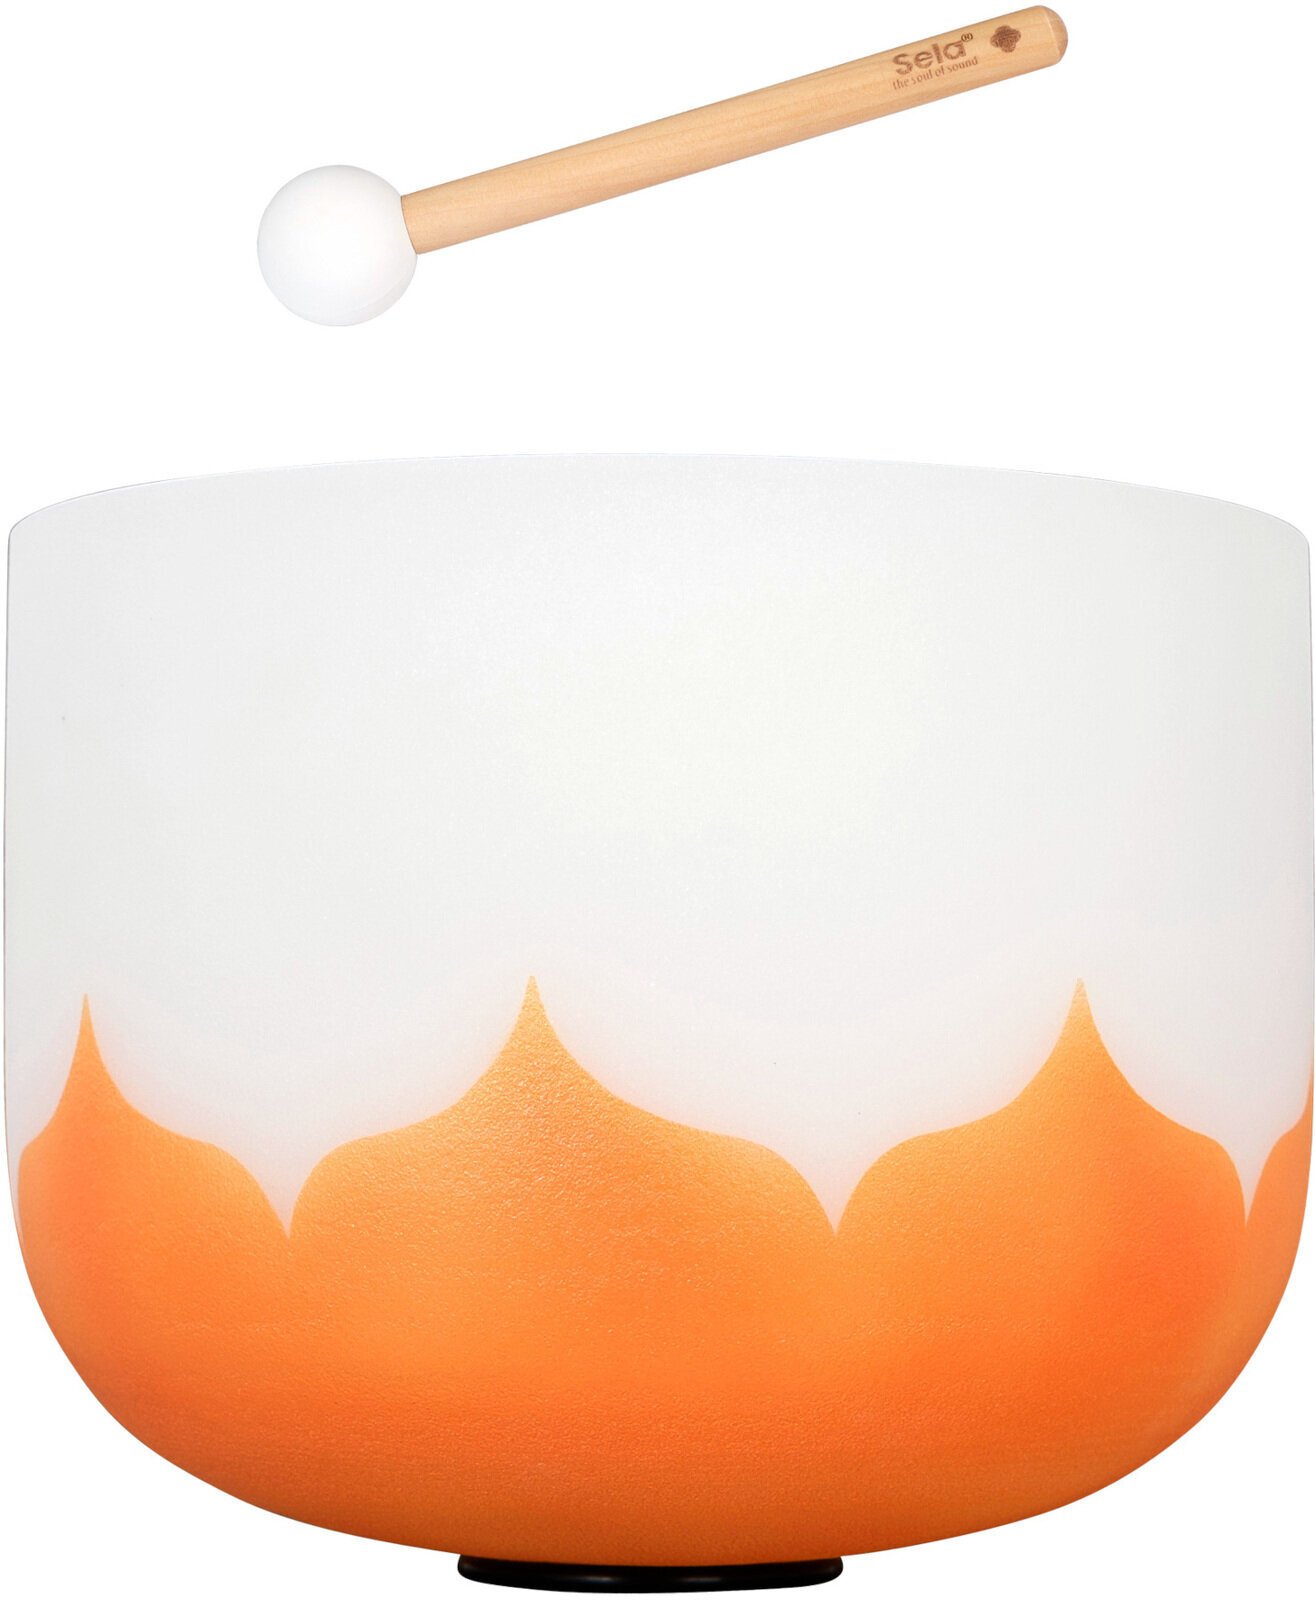 Percussion for music therapy Sela 10" Crystal Singing Bowl Lotus 432 Hz D - Orange (Sacral Chakra) incl. 1 Wood Mallet